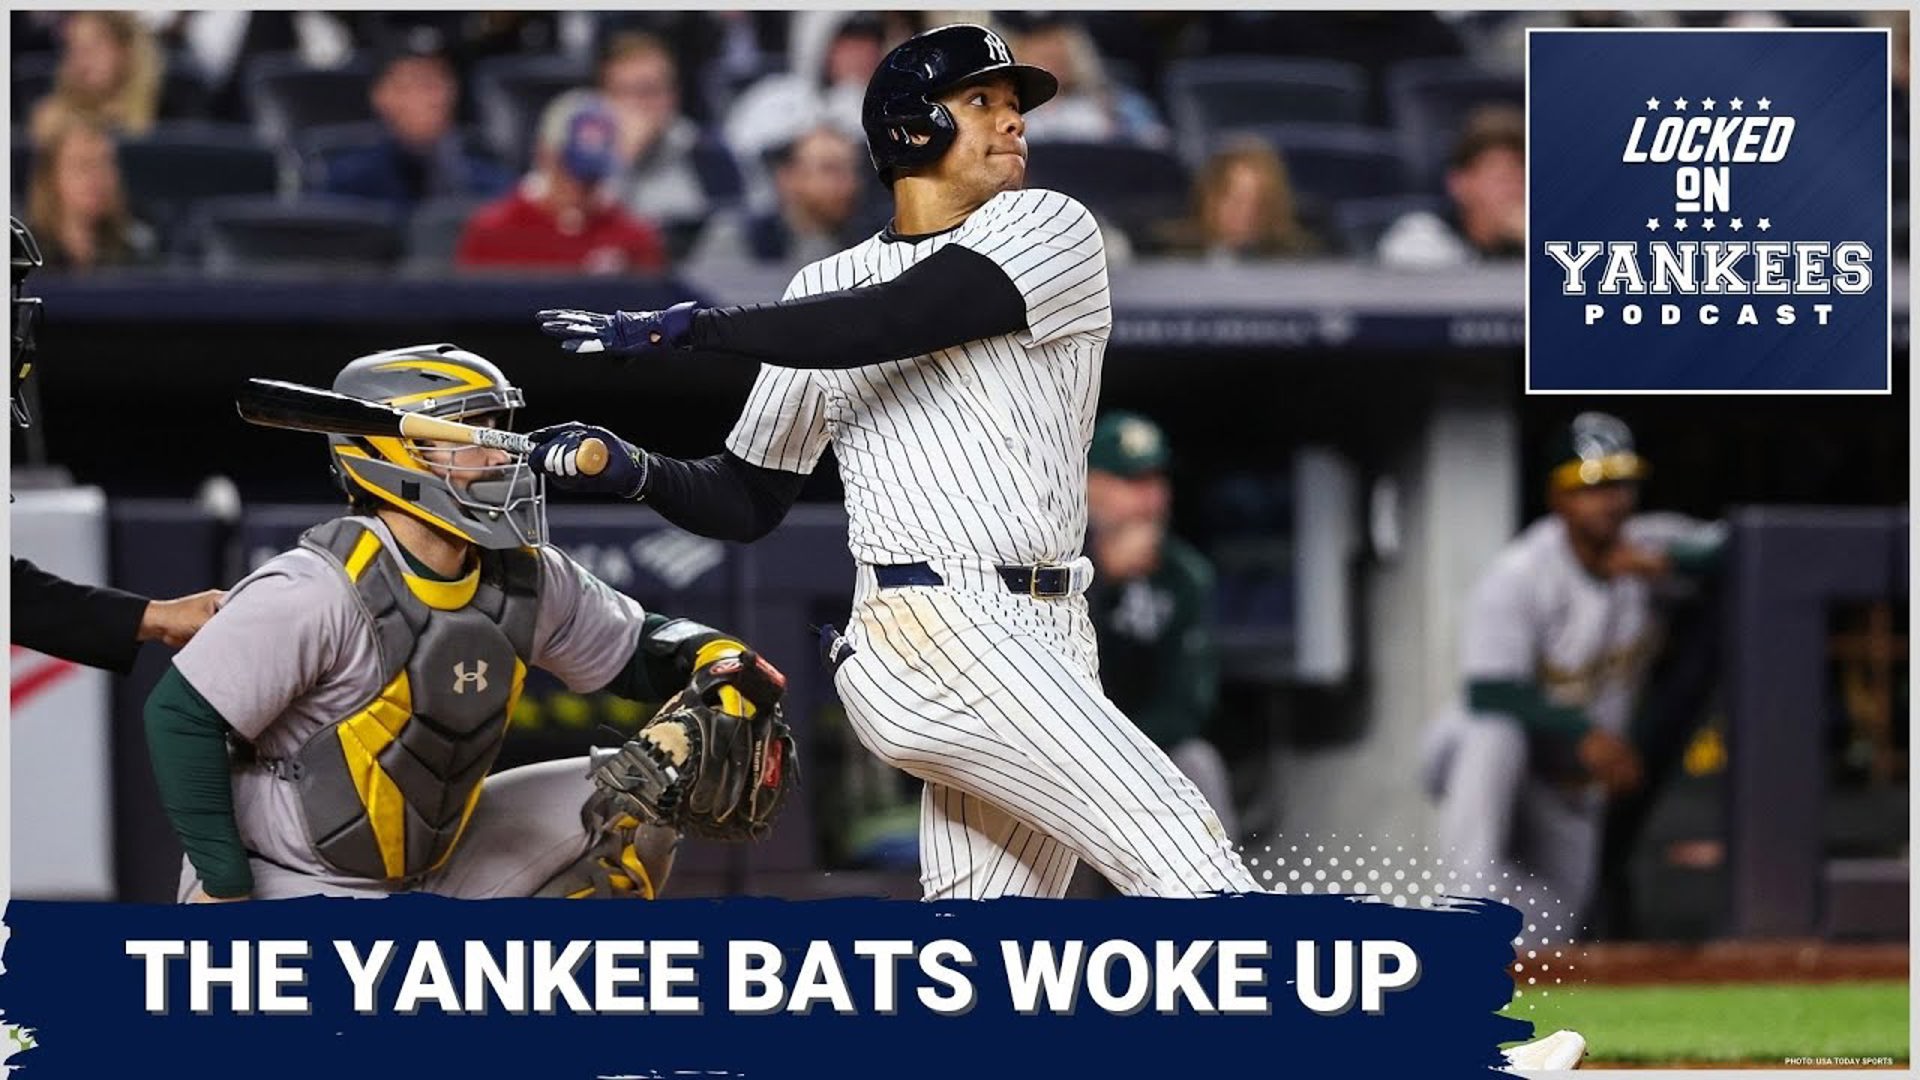 The New York Yankees beat the Oakland A’s 7-3 behind a newly awakened offense and included home runs from Aaron Judge, Anthony Rizzo, and Juan Soto!